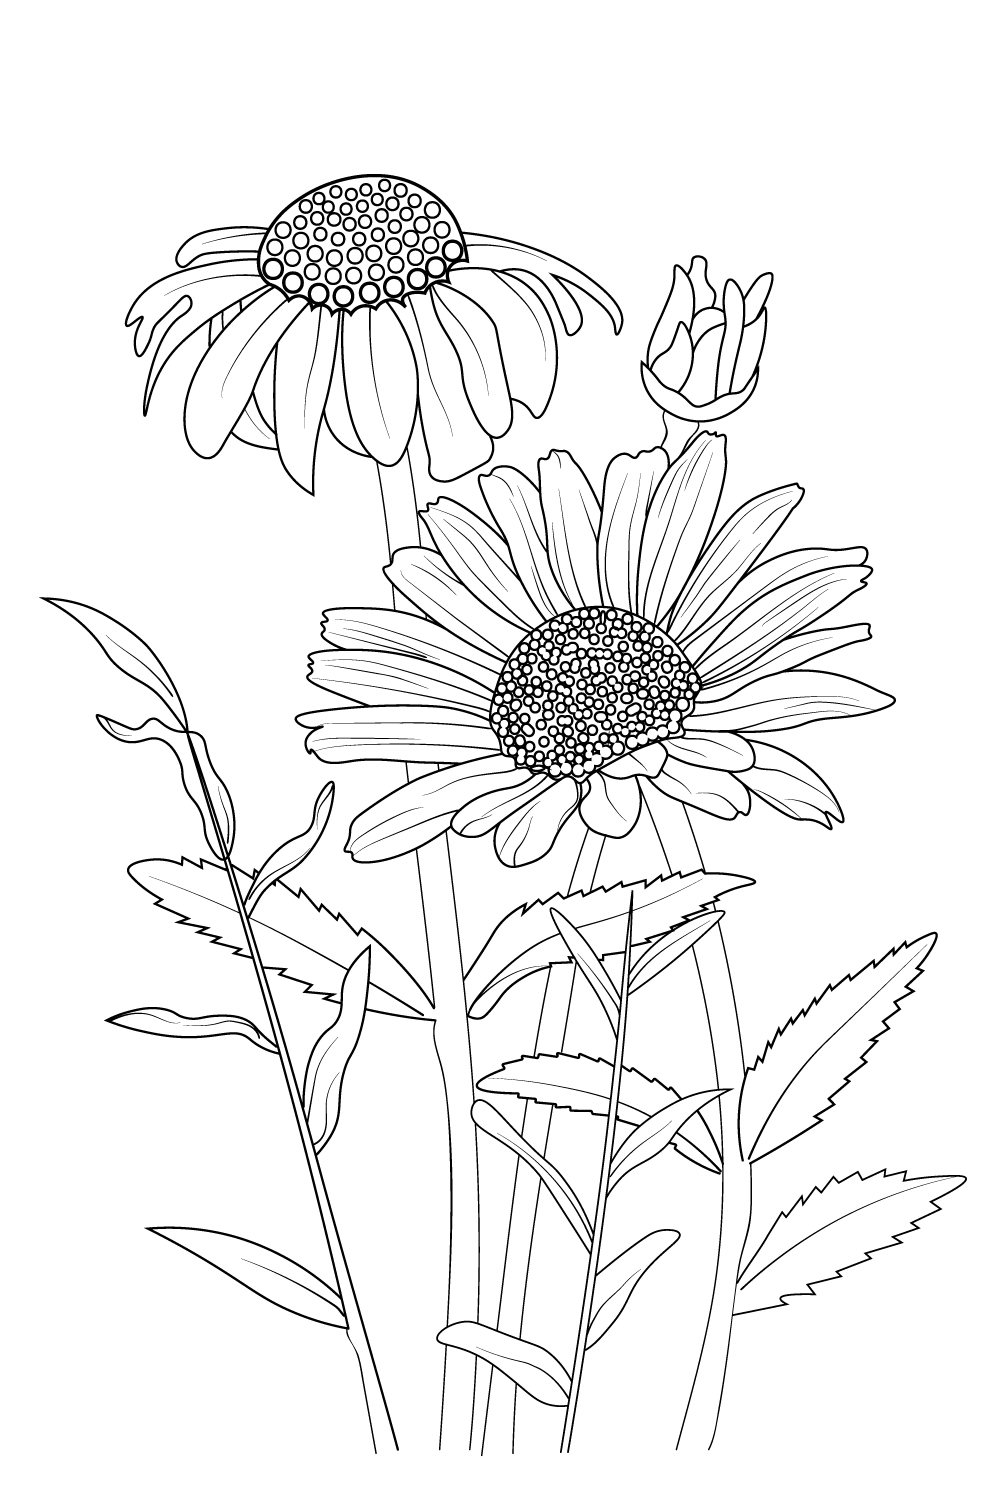 gerbera daisy drawing outline, easy gerbera daisy drawing, outline simple daisy drawing pinterest preview image.